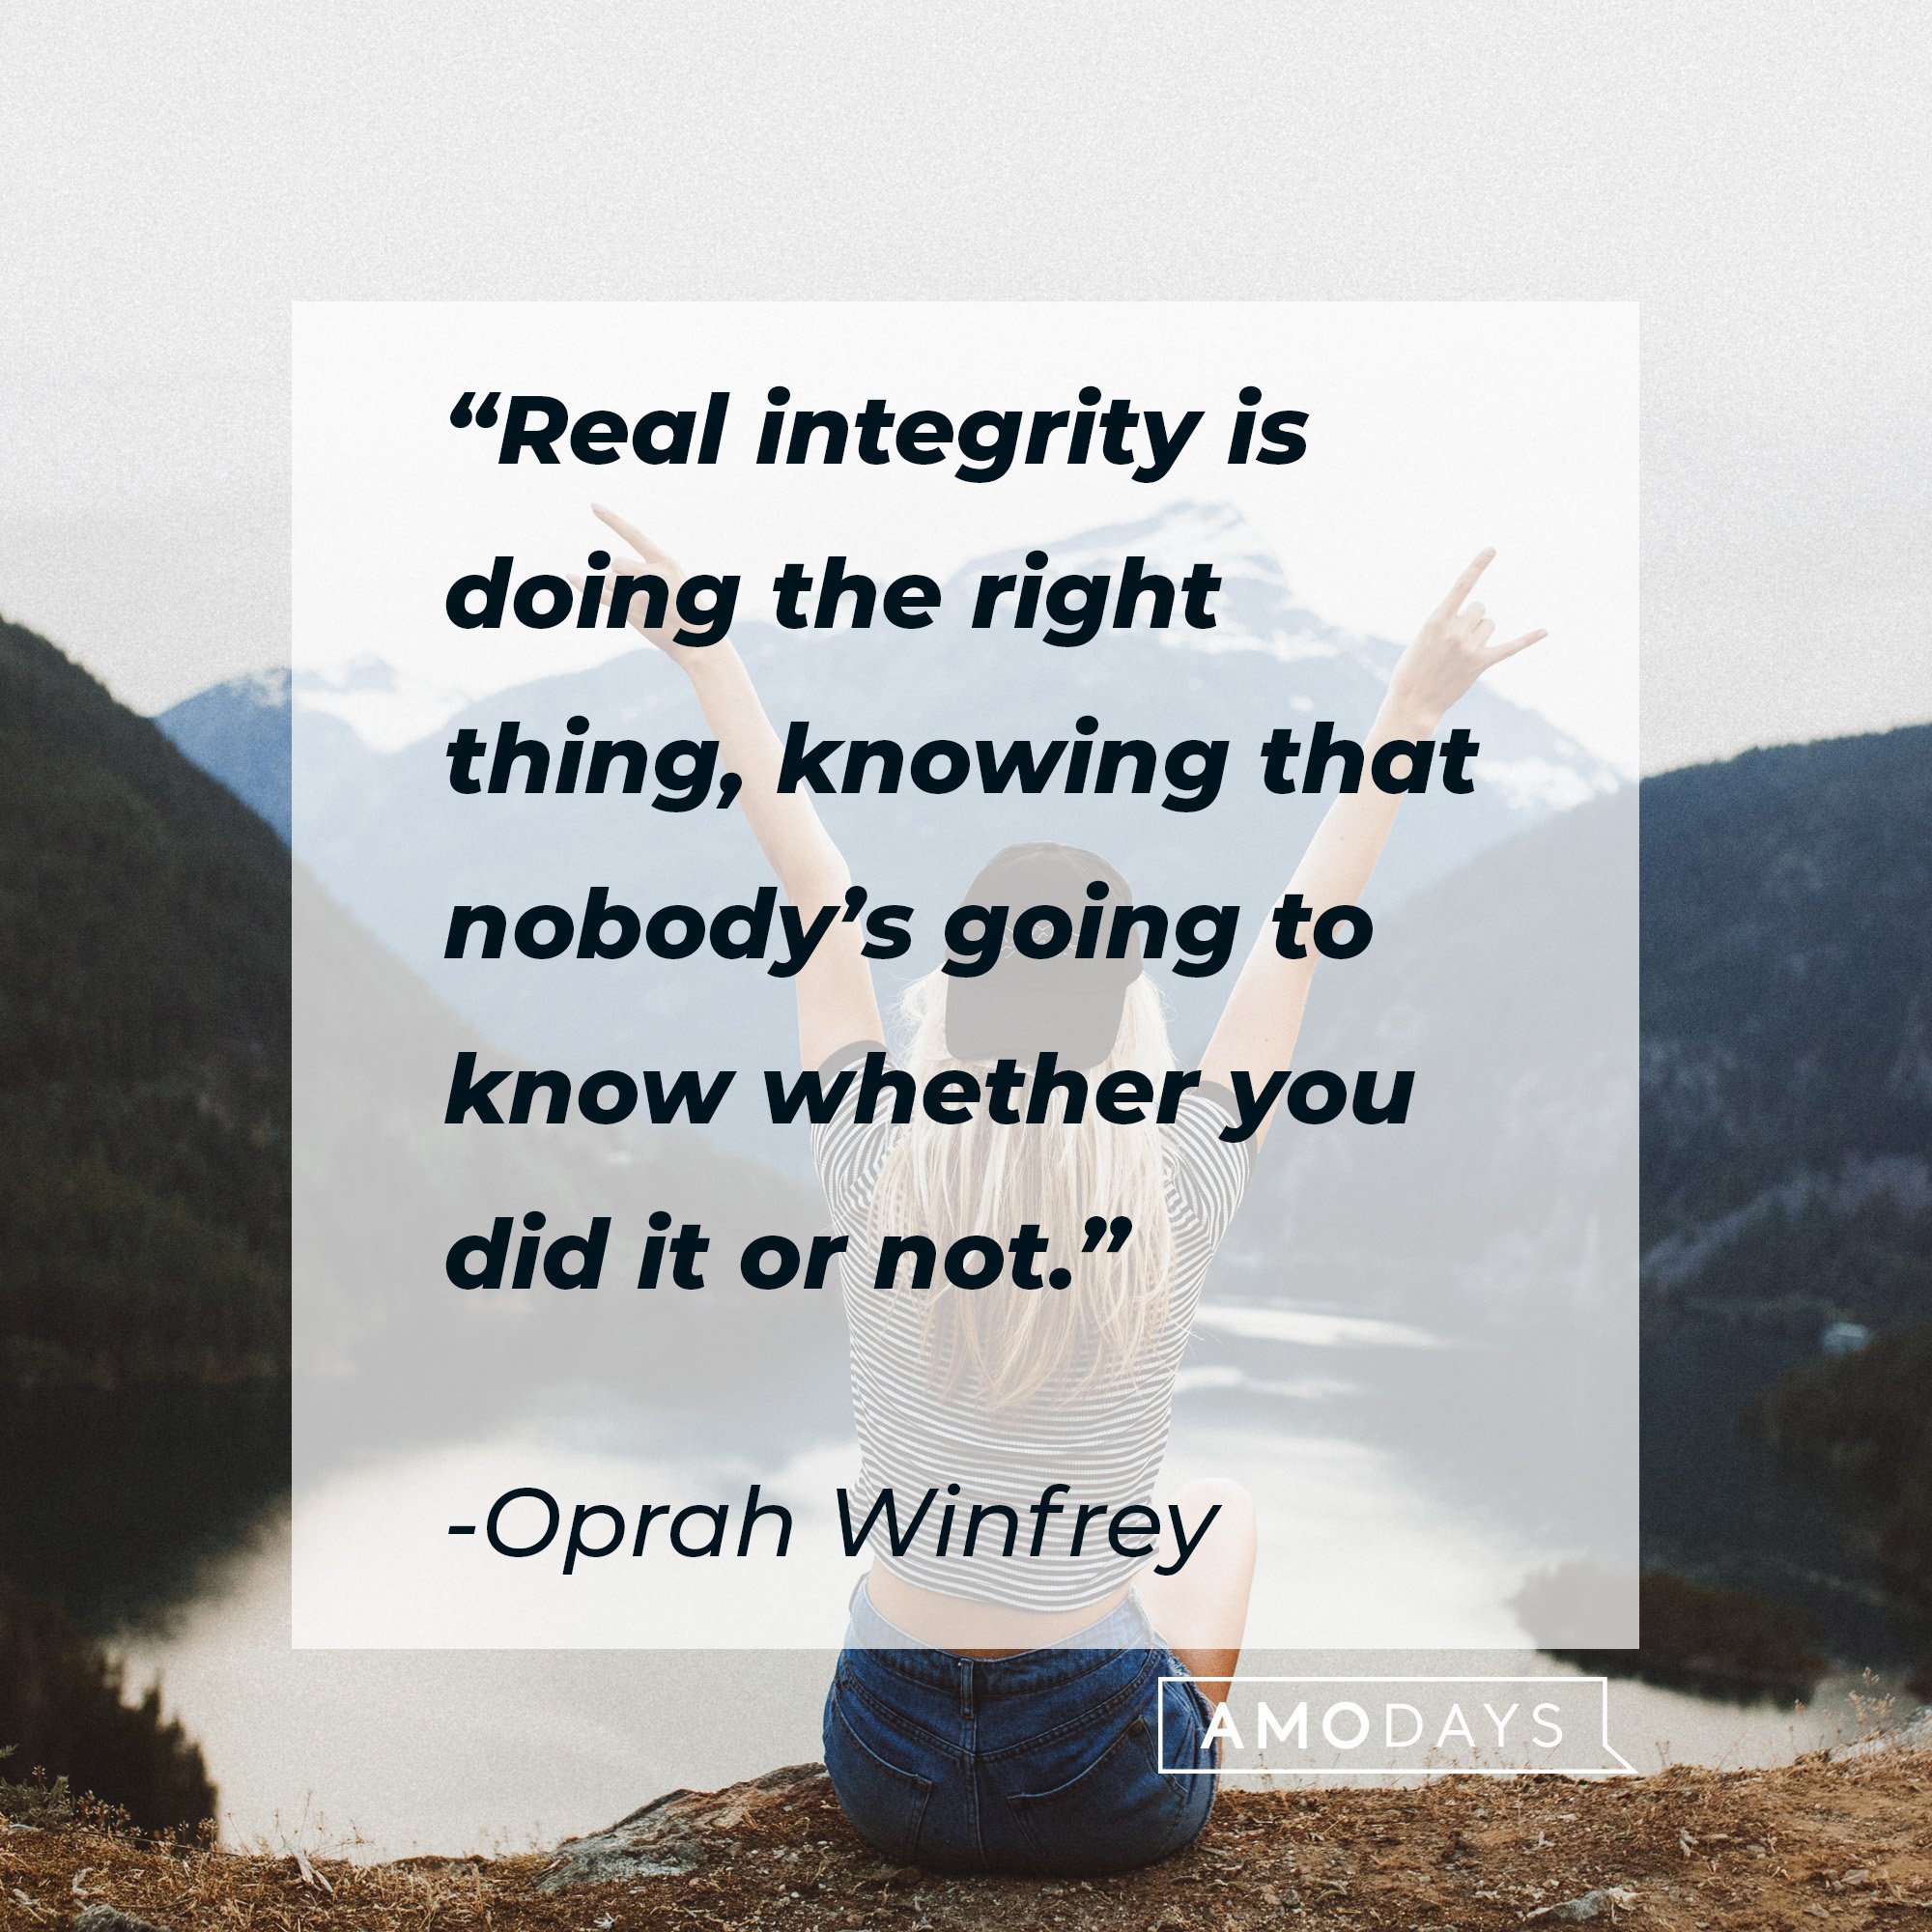 Oprah Winfrey's quote: “Real integrity is doing the right thing, knowing that nobody’s going to know whether you did it or not.” | Image: AmoDays